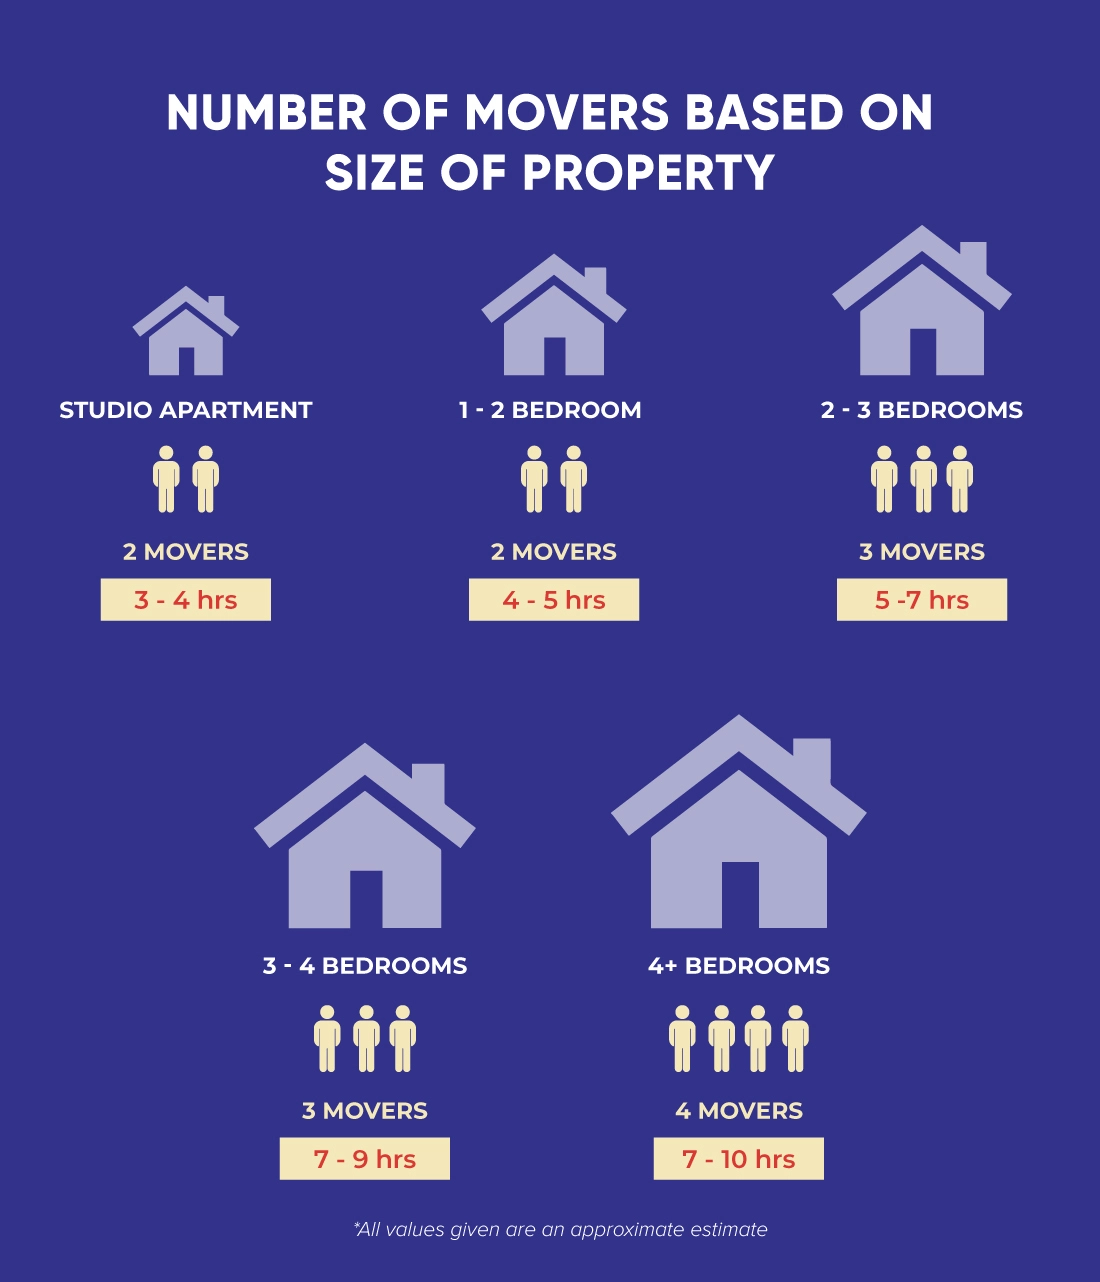 Number of movers based on property size in Edmonton